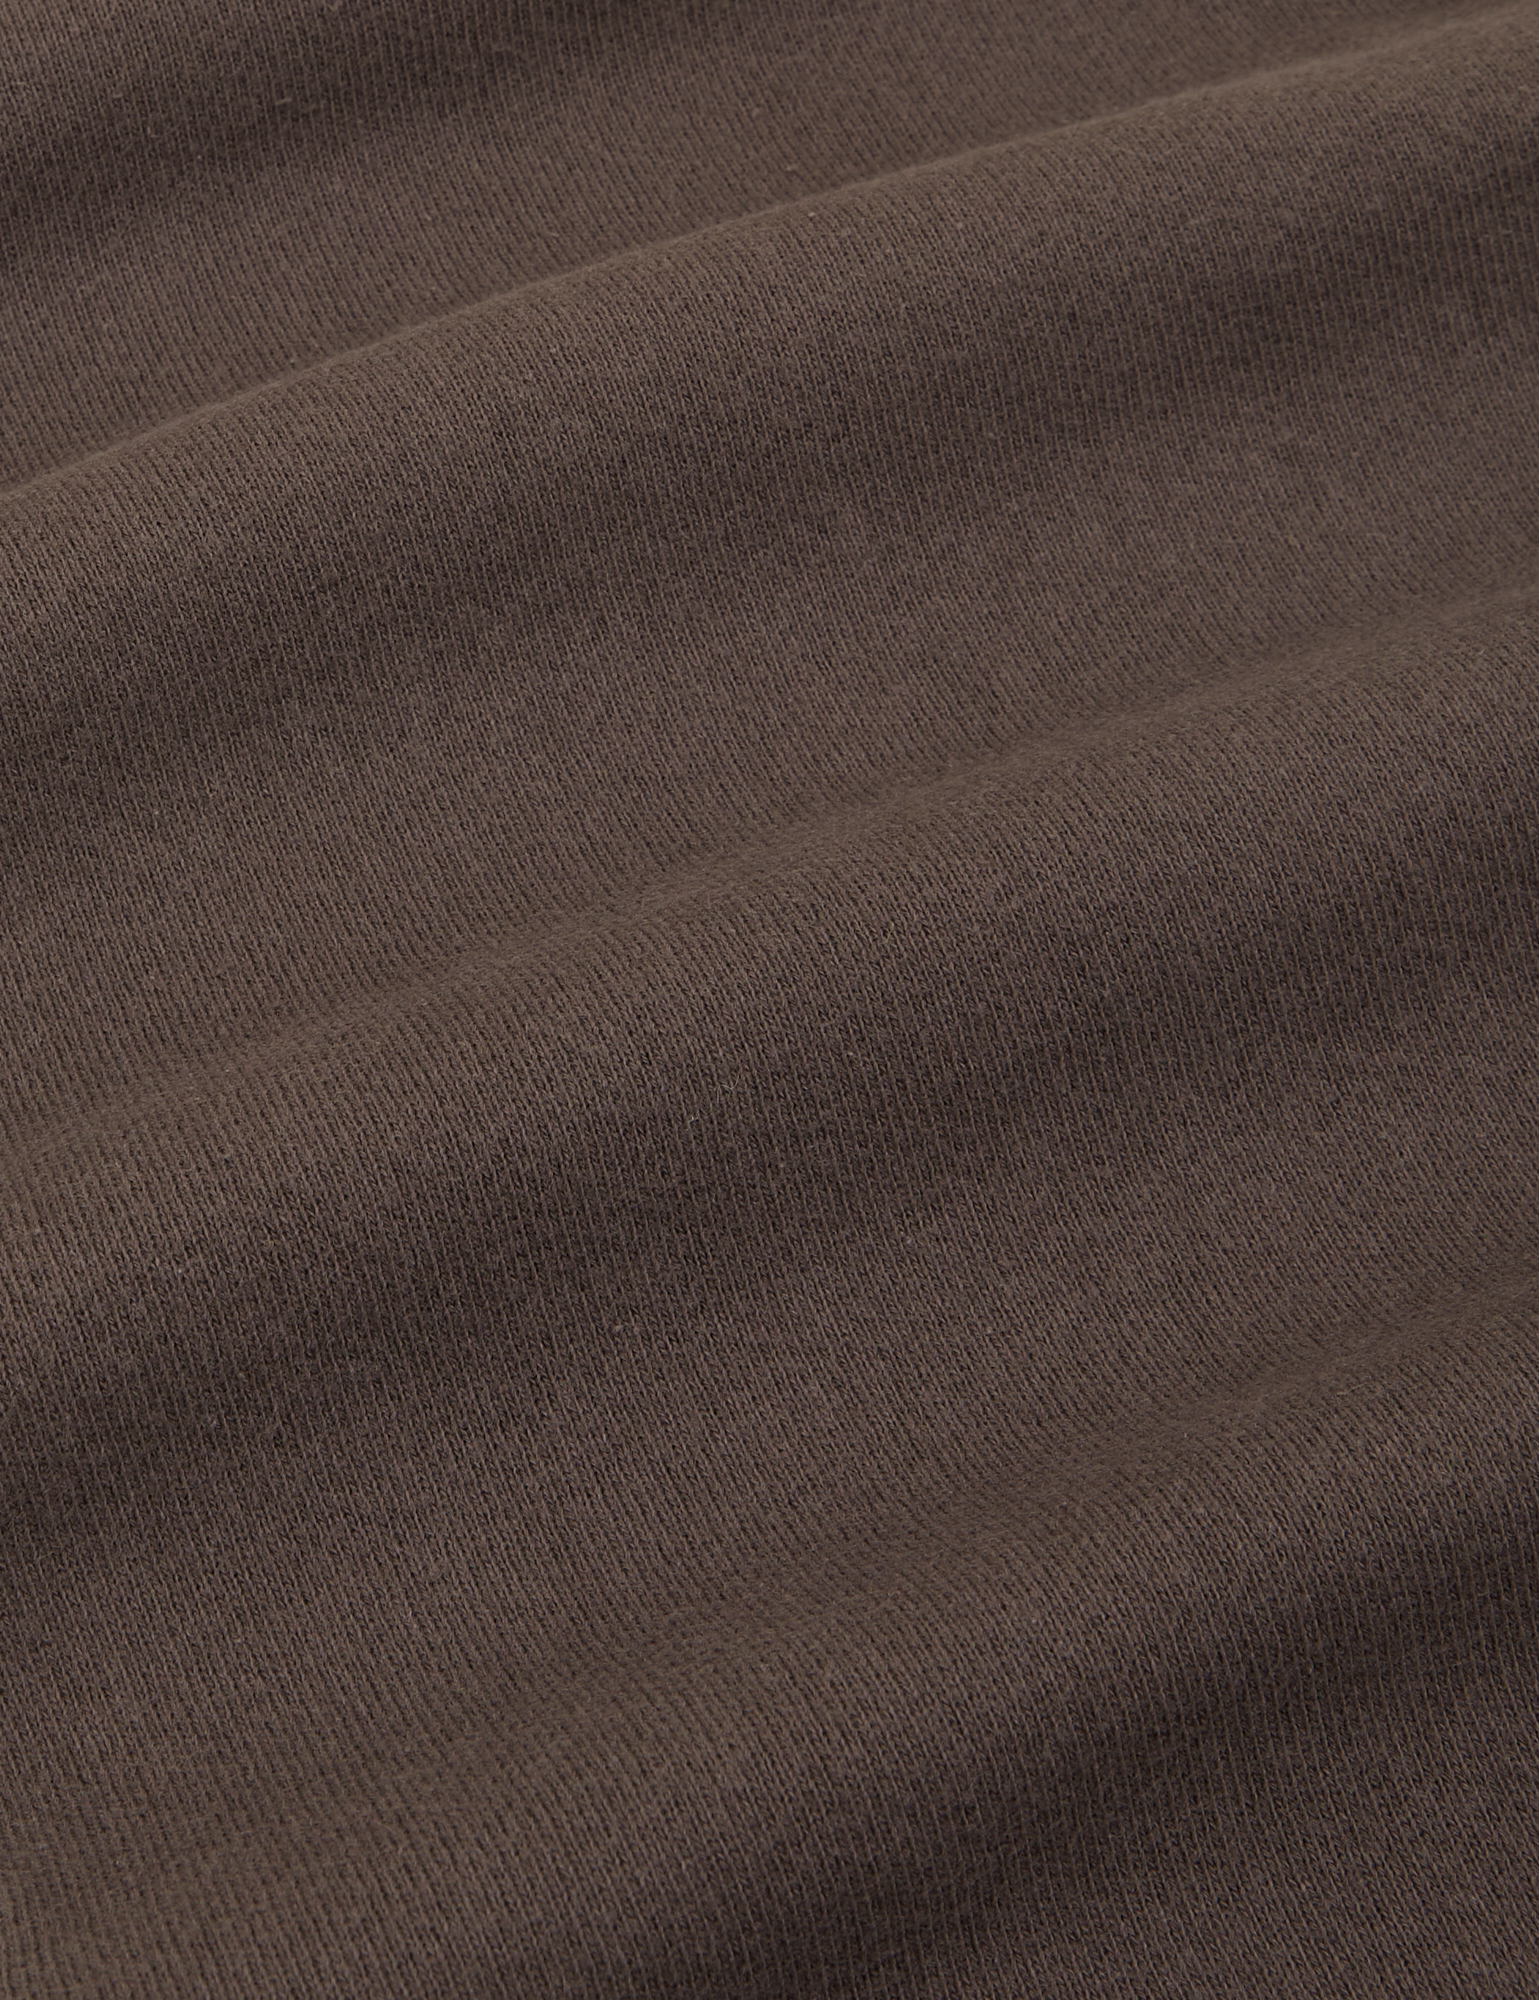 Cropped Rolled Cuff Sweatpants in Espresso Brown fabric detail close up